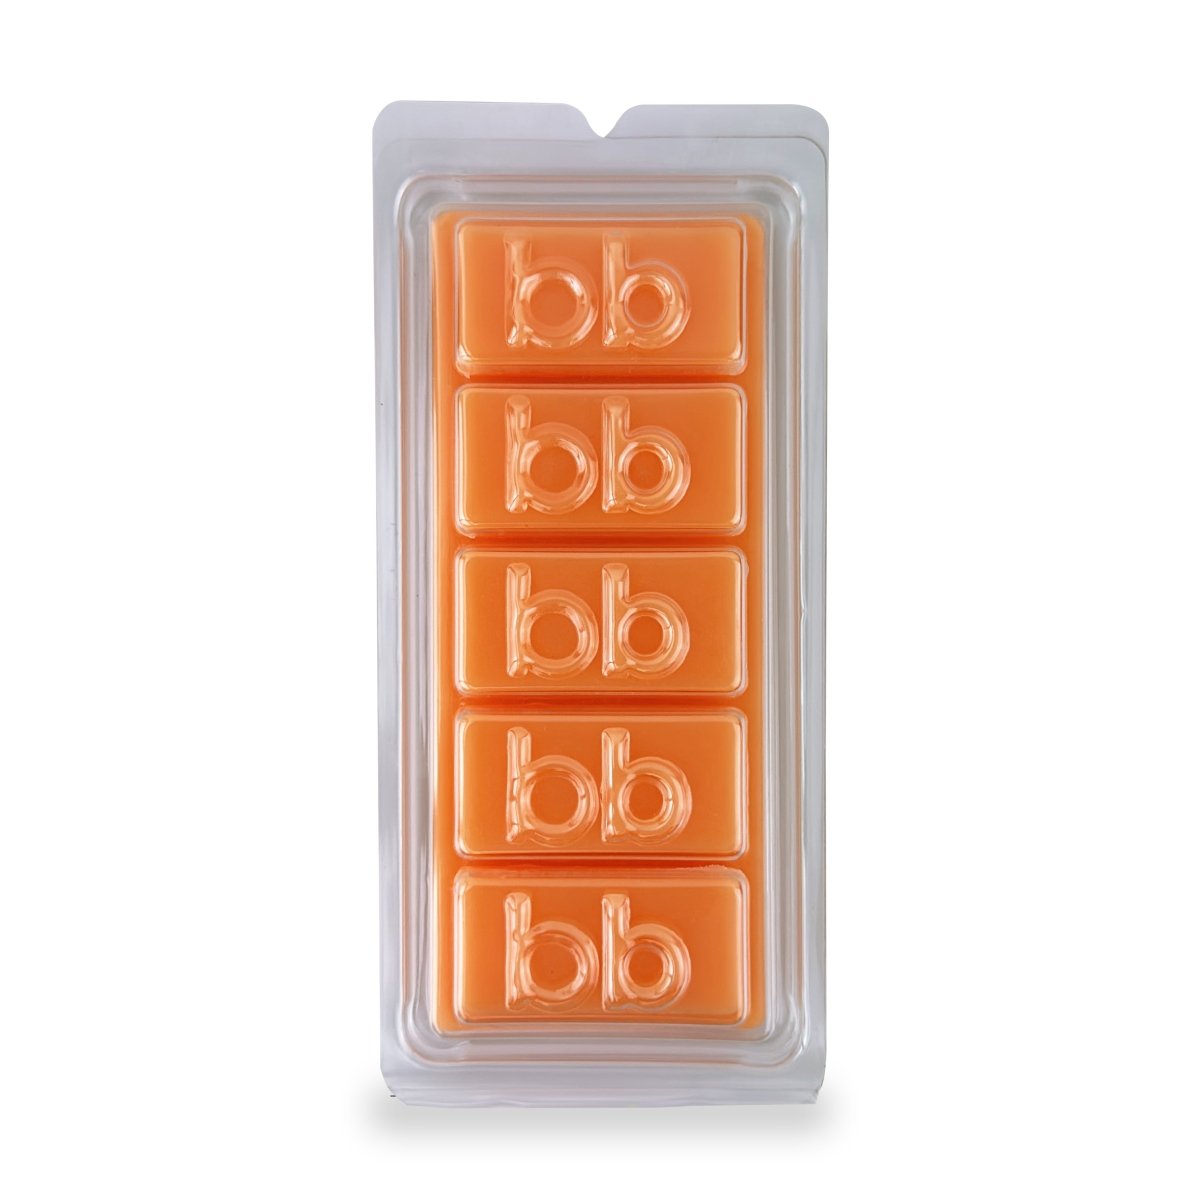 Gingerbread Natural Soy Wax Melts - Candle Alternative Aromatherapy & Strong Scent Fragrance Made in Australia by Bath Box